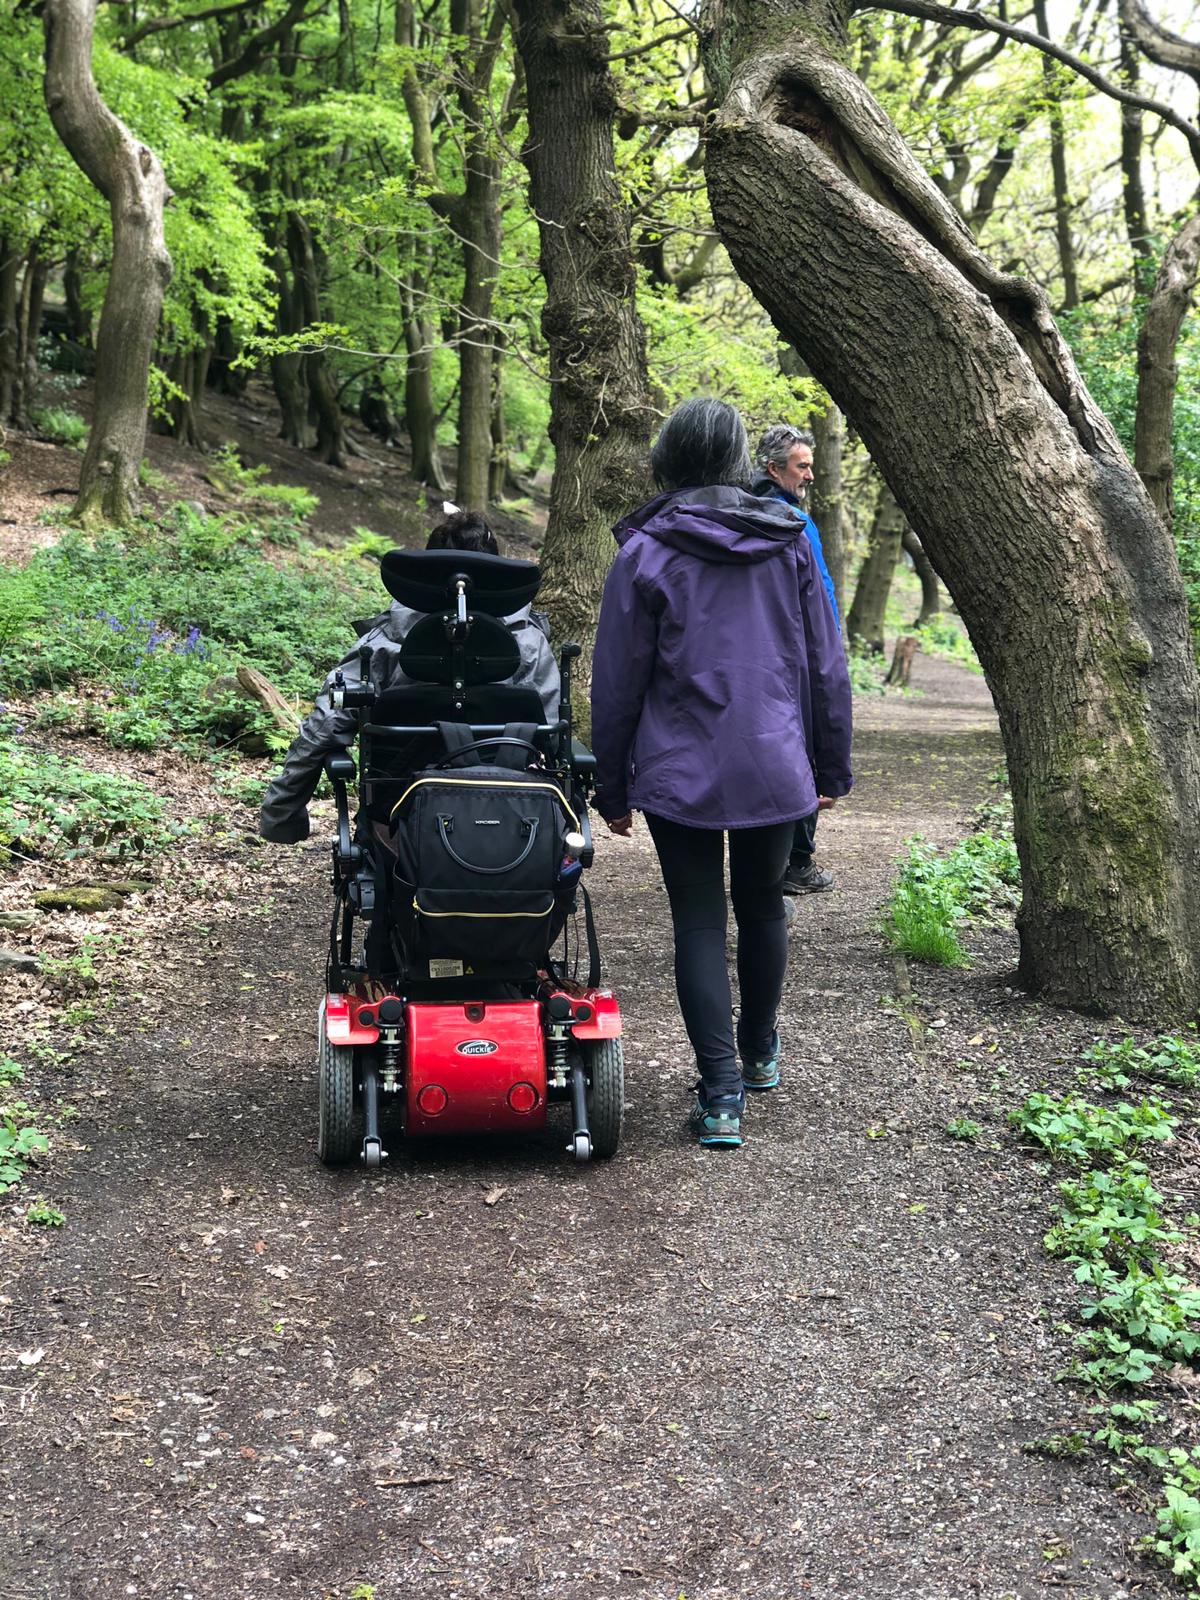 Image shows two people going down a woodland path with bluebells visible in the undergrowth. The person on the left is in a wheelchair and the person on the right is walking.